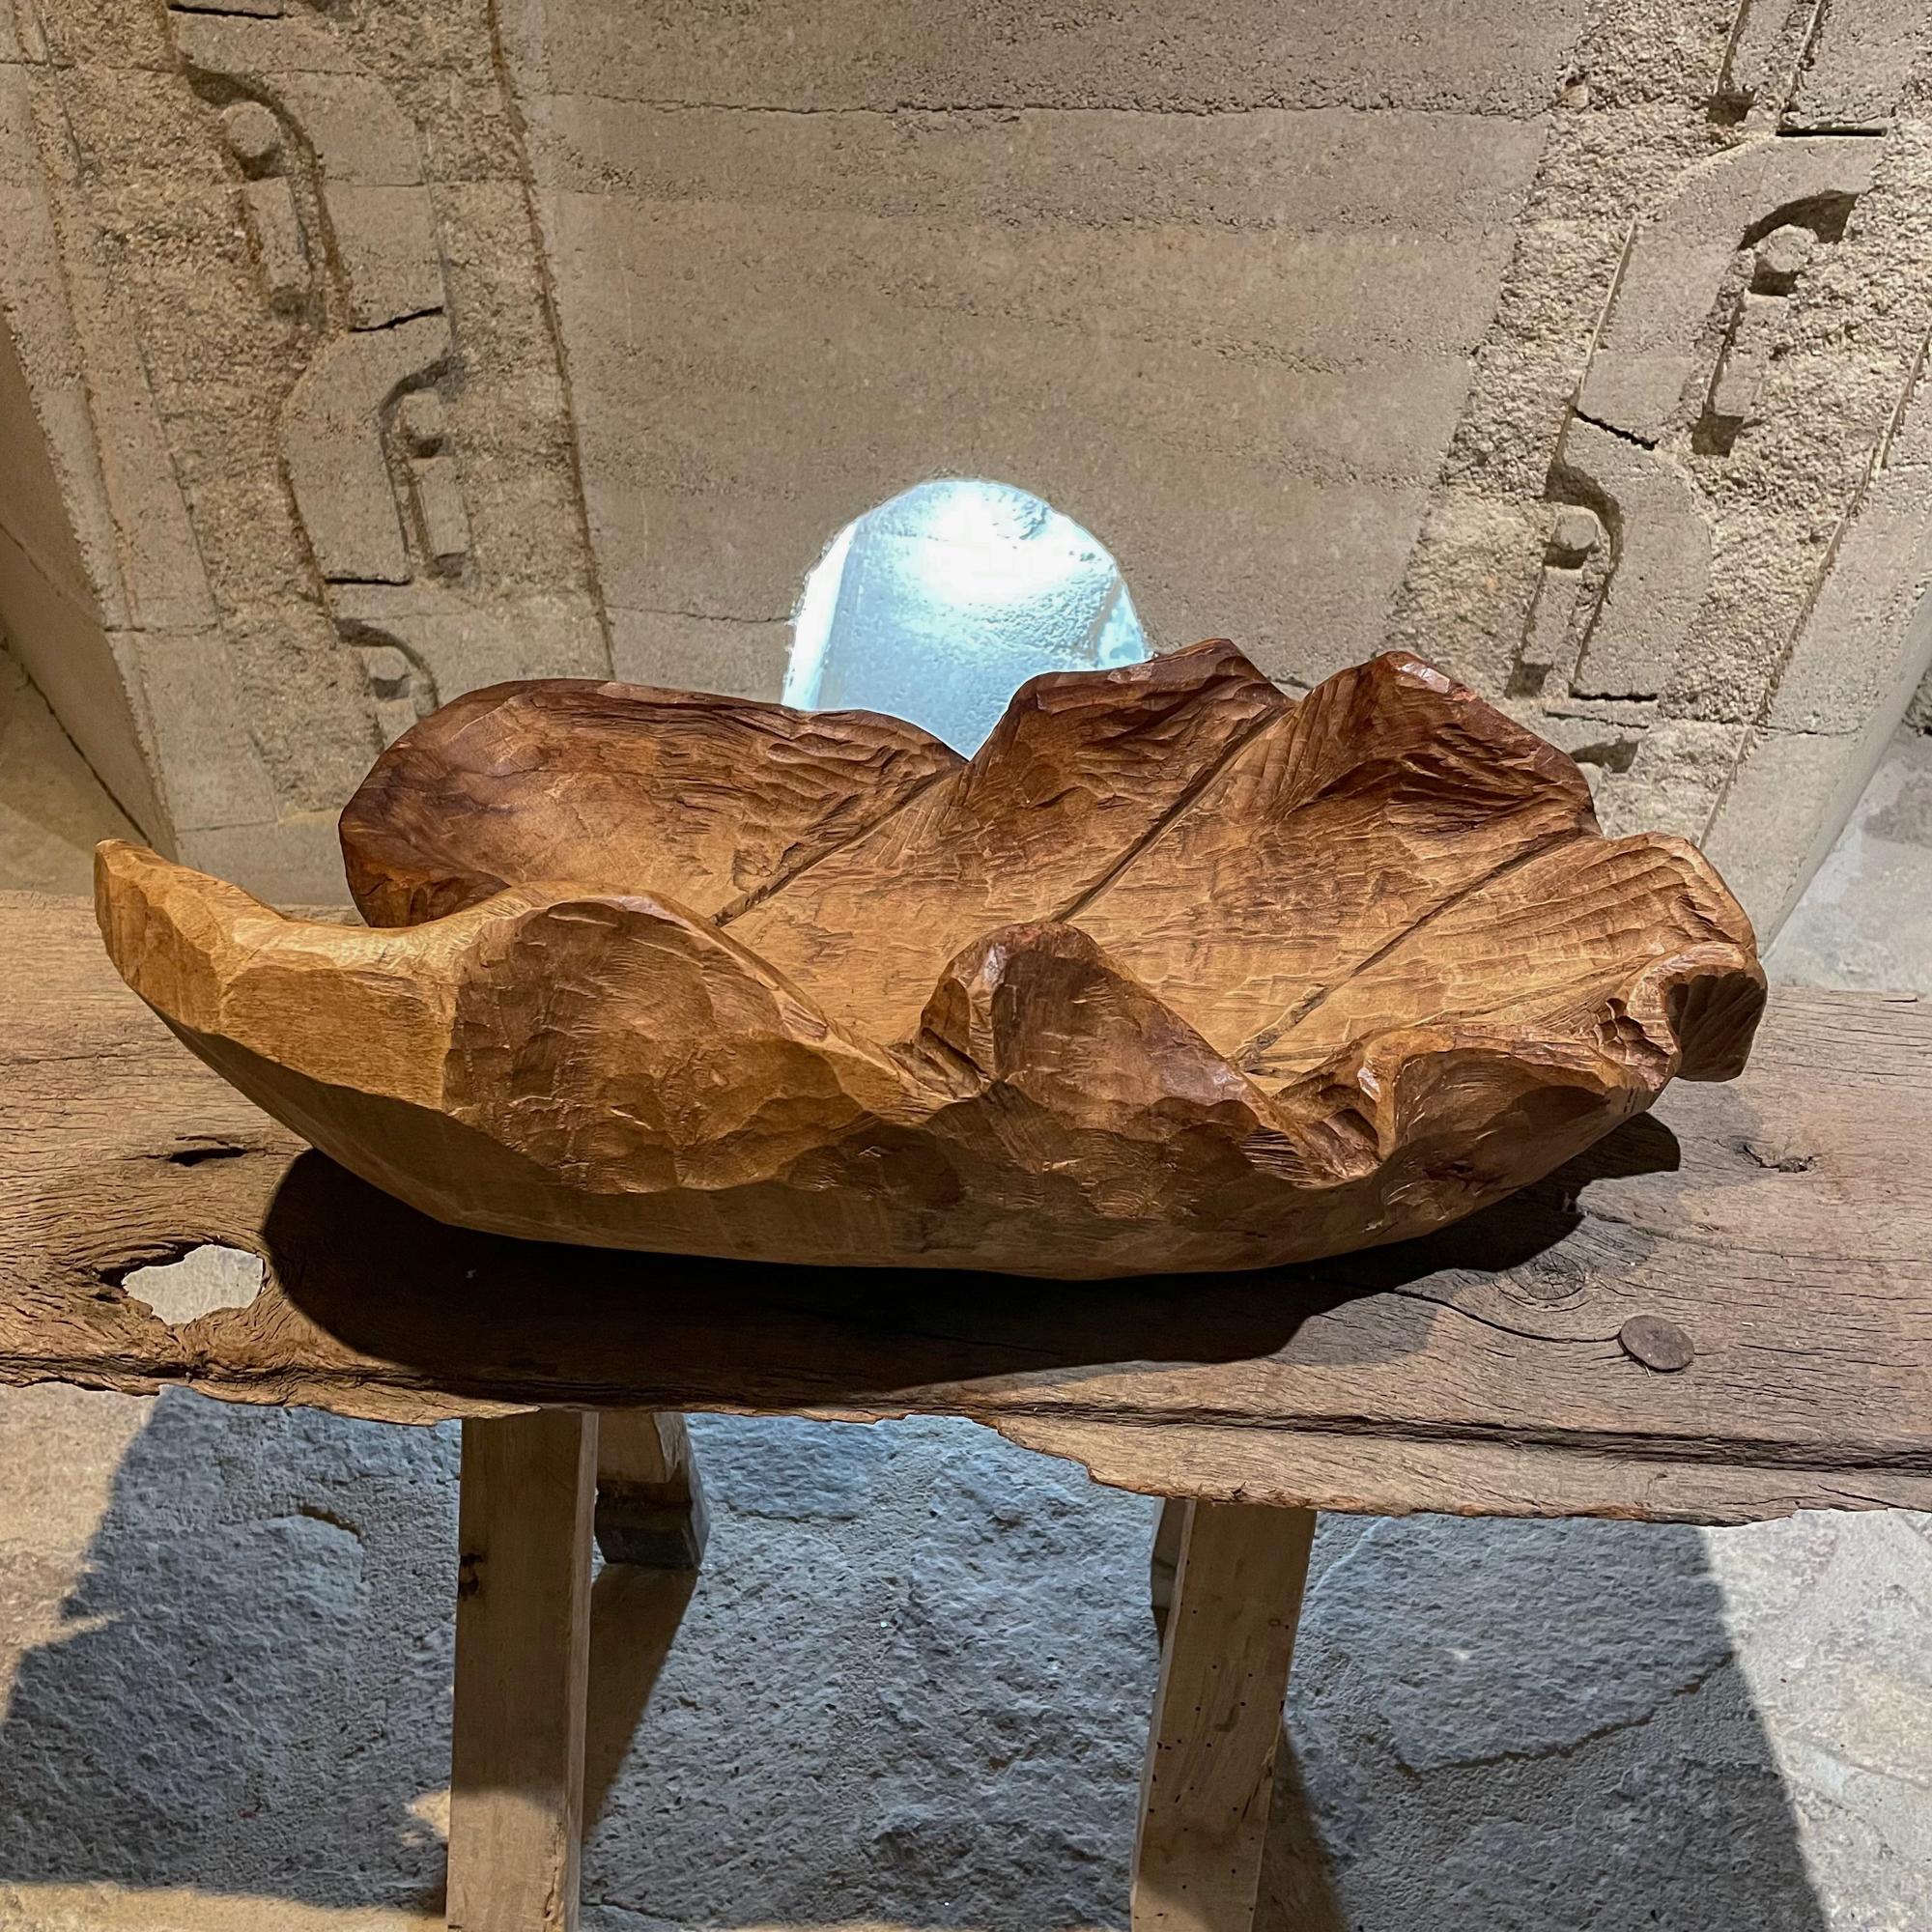 Graceful organic modern textured wood bowl large leaf branch design
Free form 
Measures: 6.75 x 12 W x 20.25 L inches
Unrestored vintage condition.
See our images please.
    